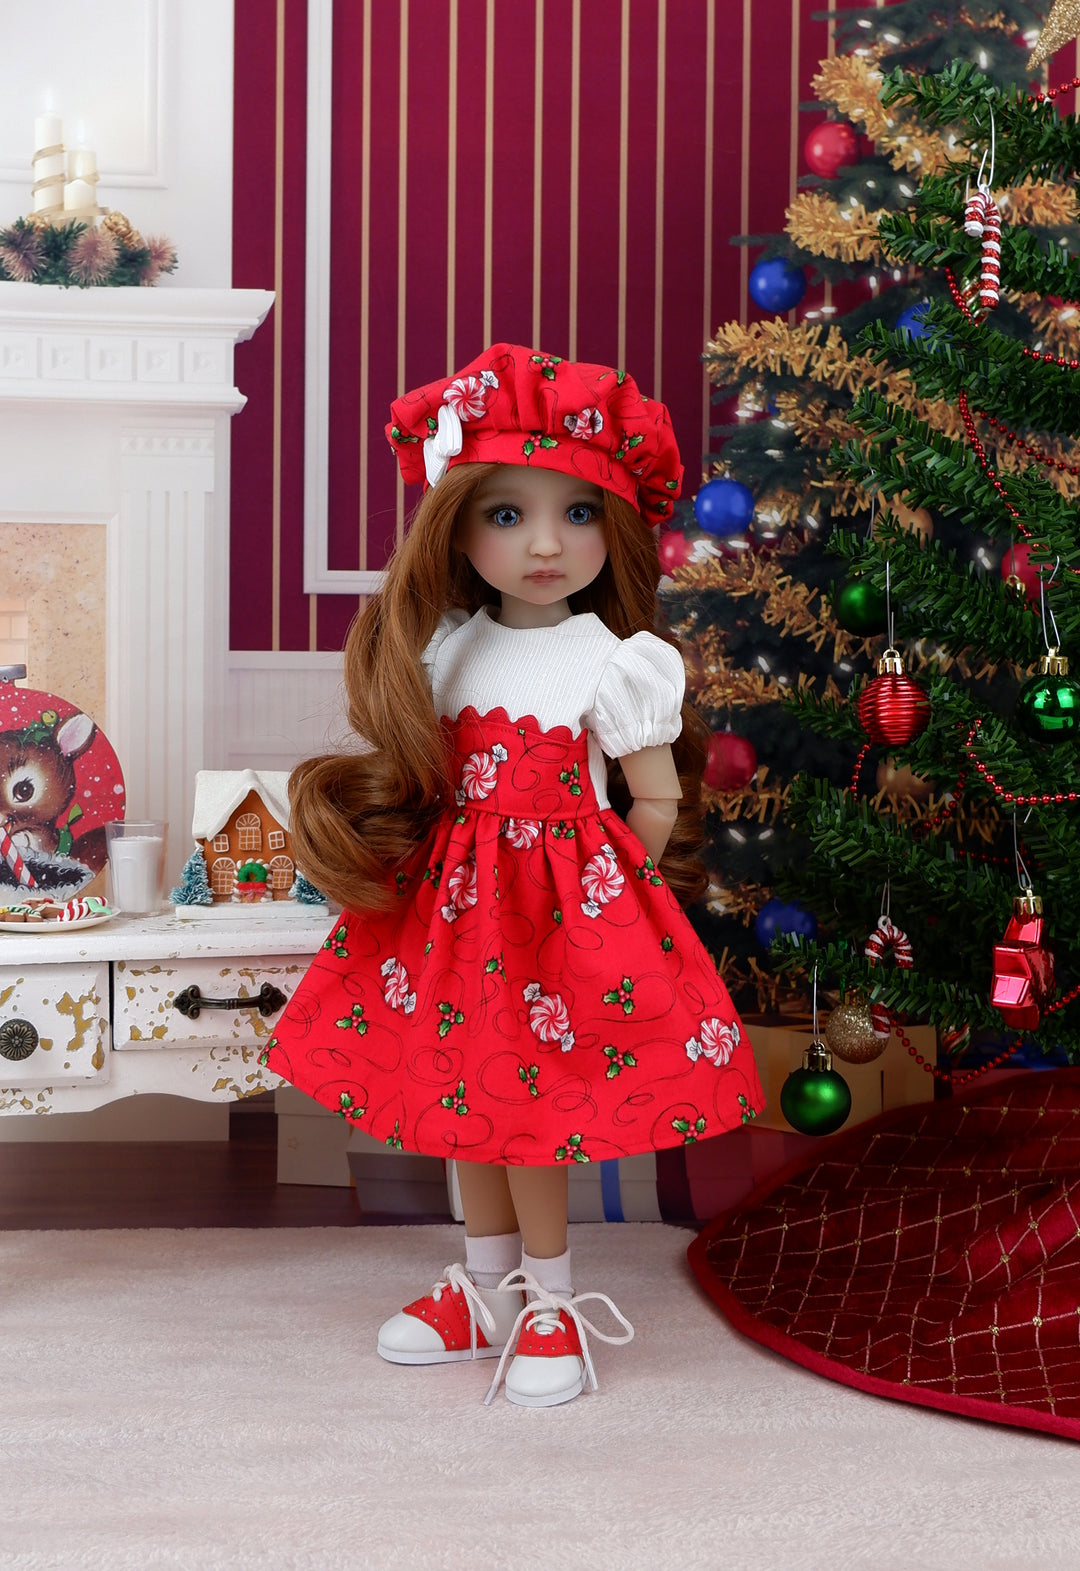 Peppermints & Holly - dress and shoes for Ruby Red Fashion Friends doll